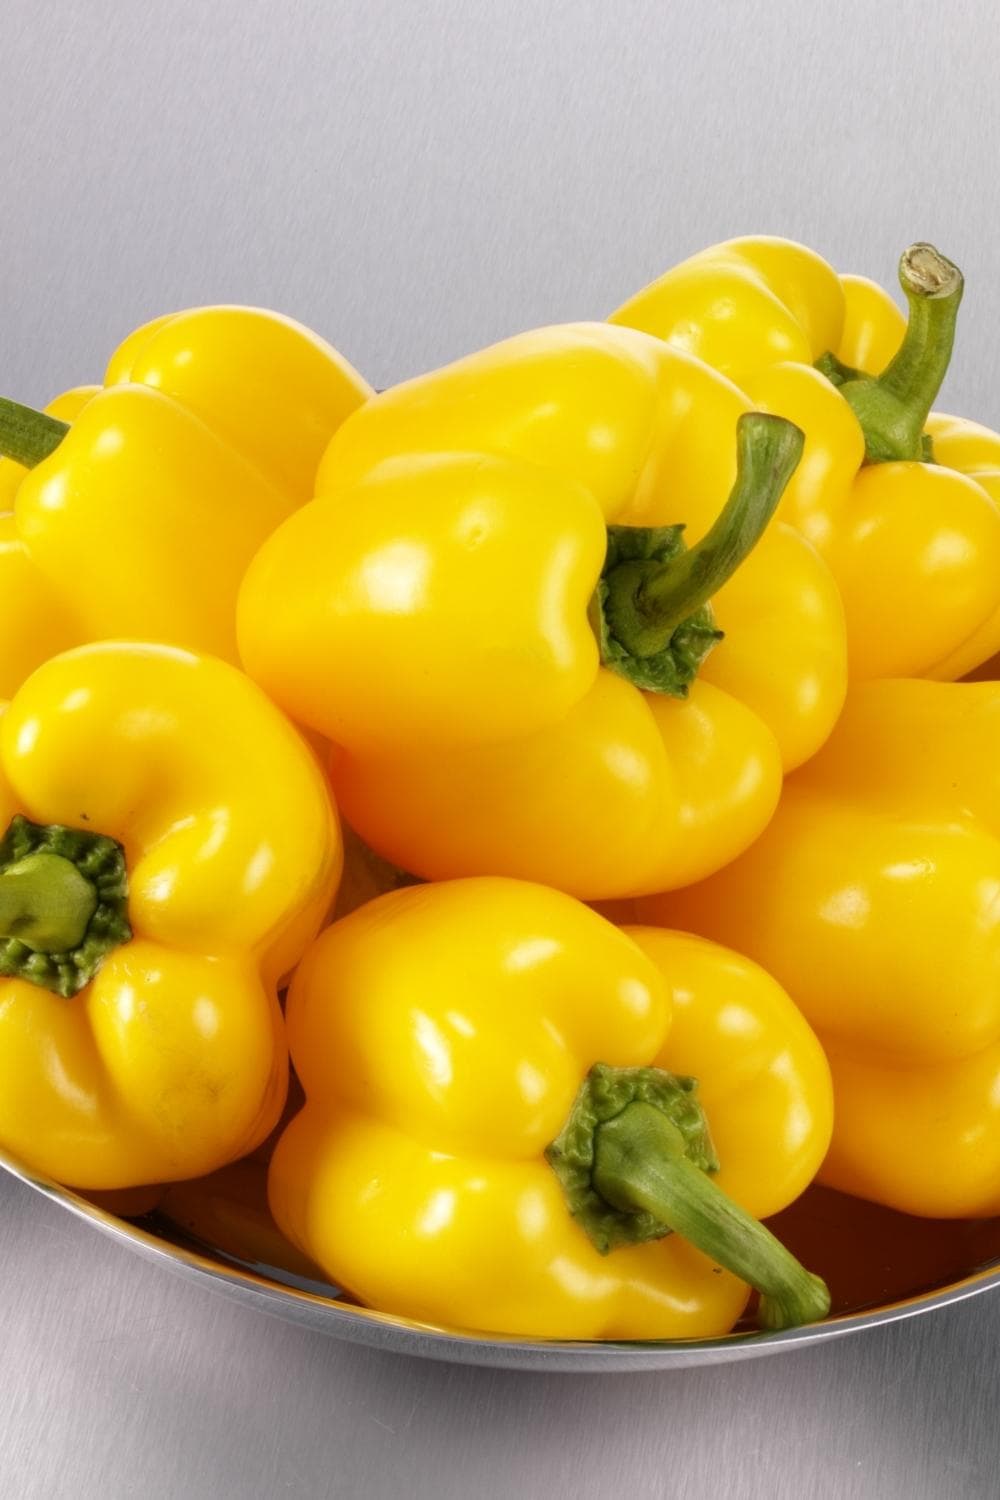 Stainless bowl filled with ripe yellow, shiny skinned bell peppers. 